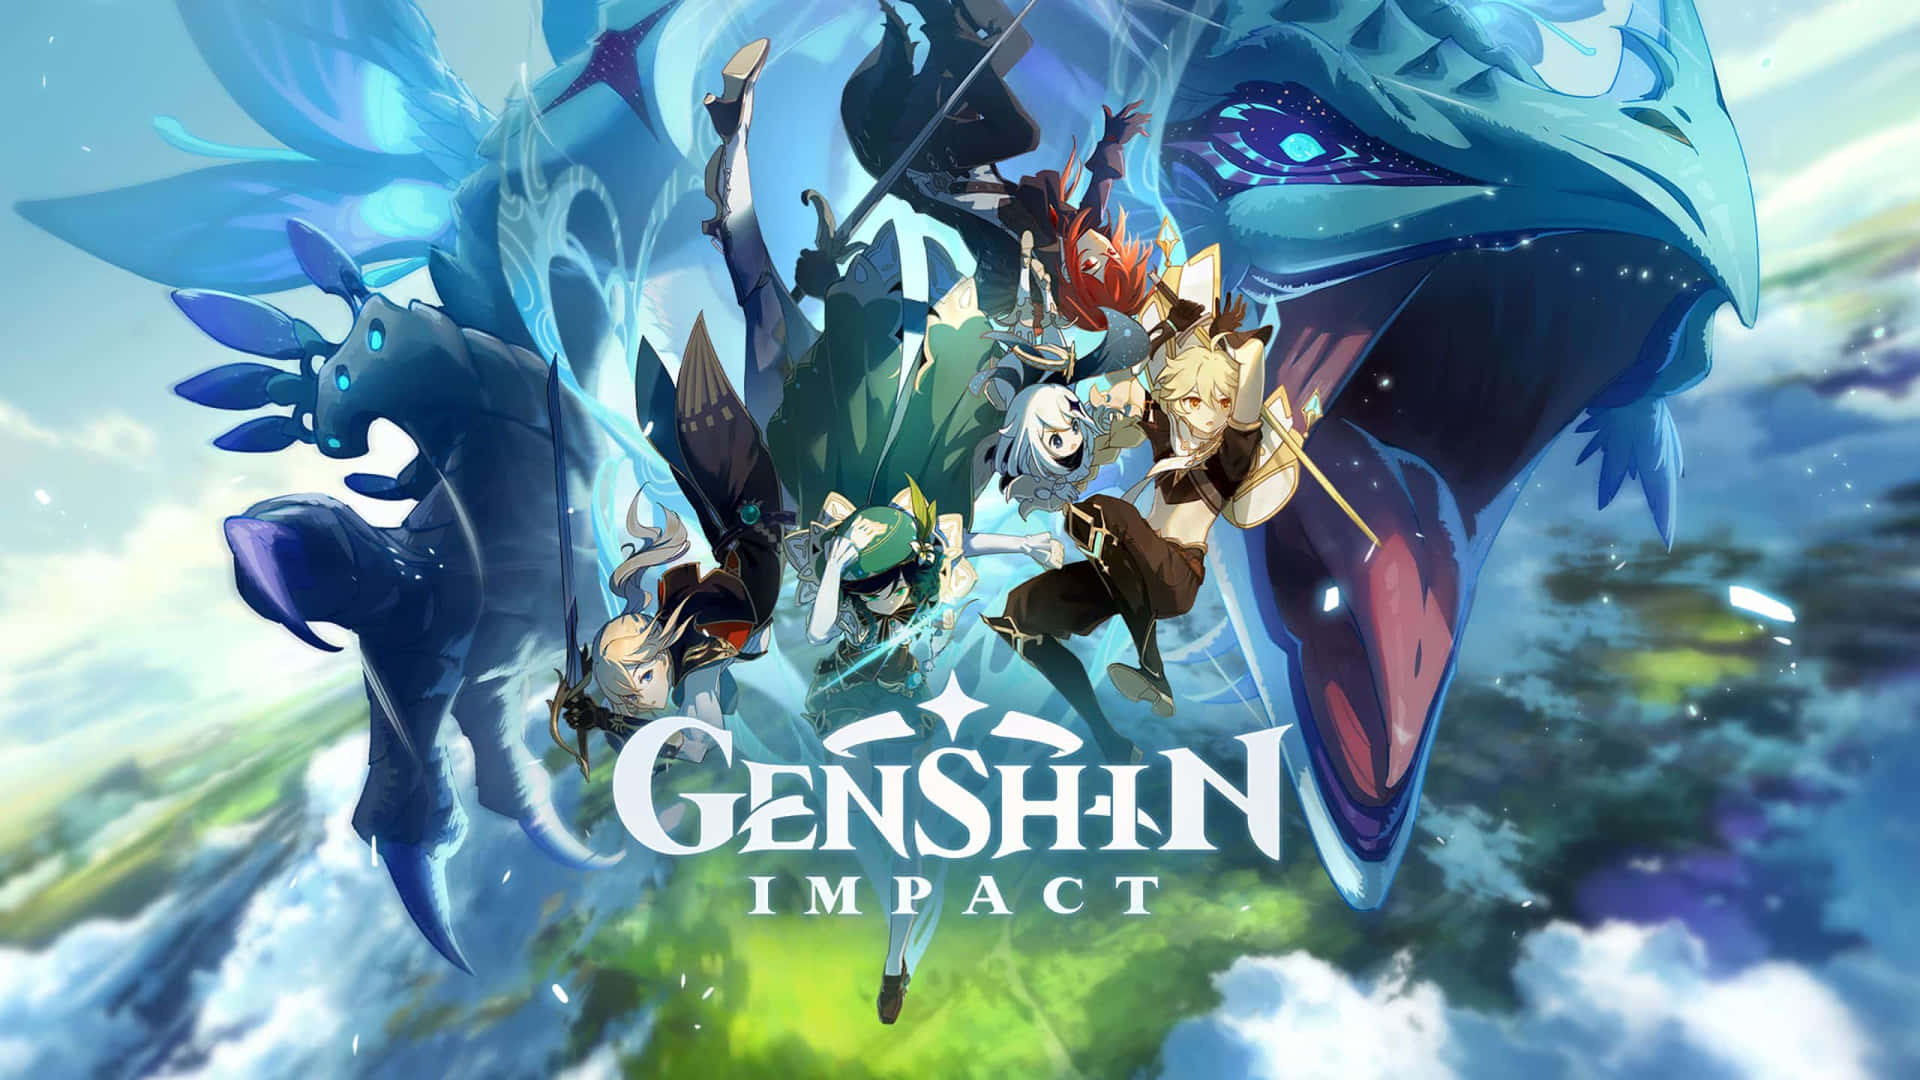 Genshin Impact characters gather for an epic adventure Wallpaper